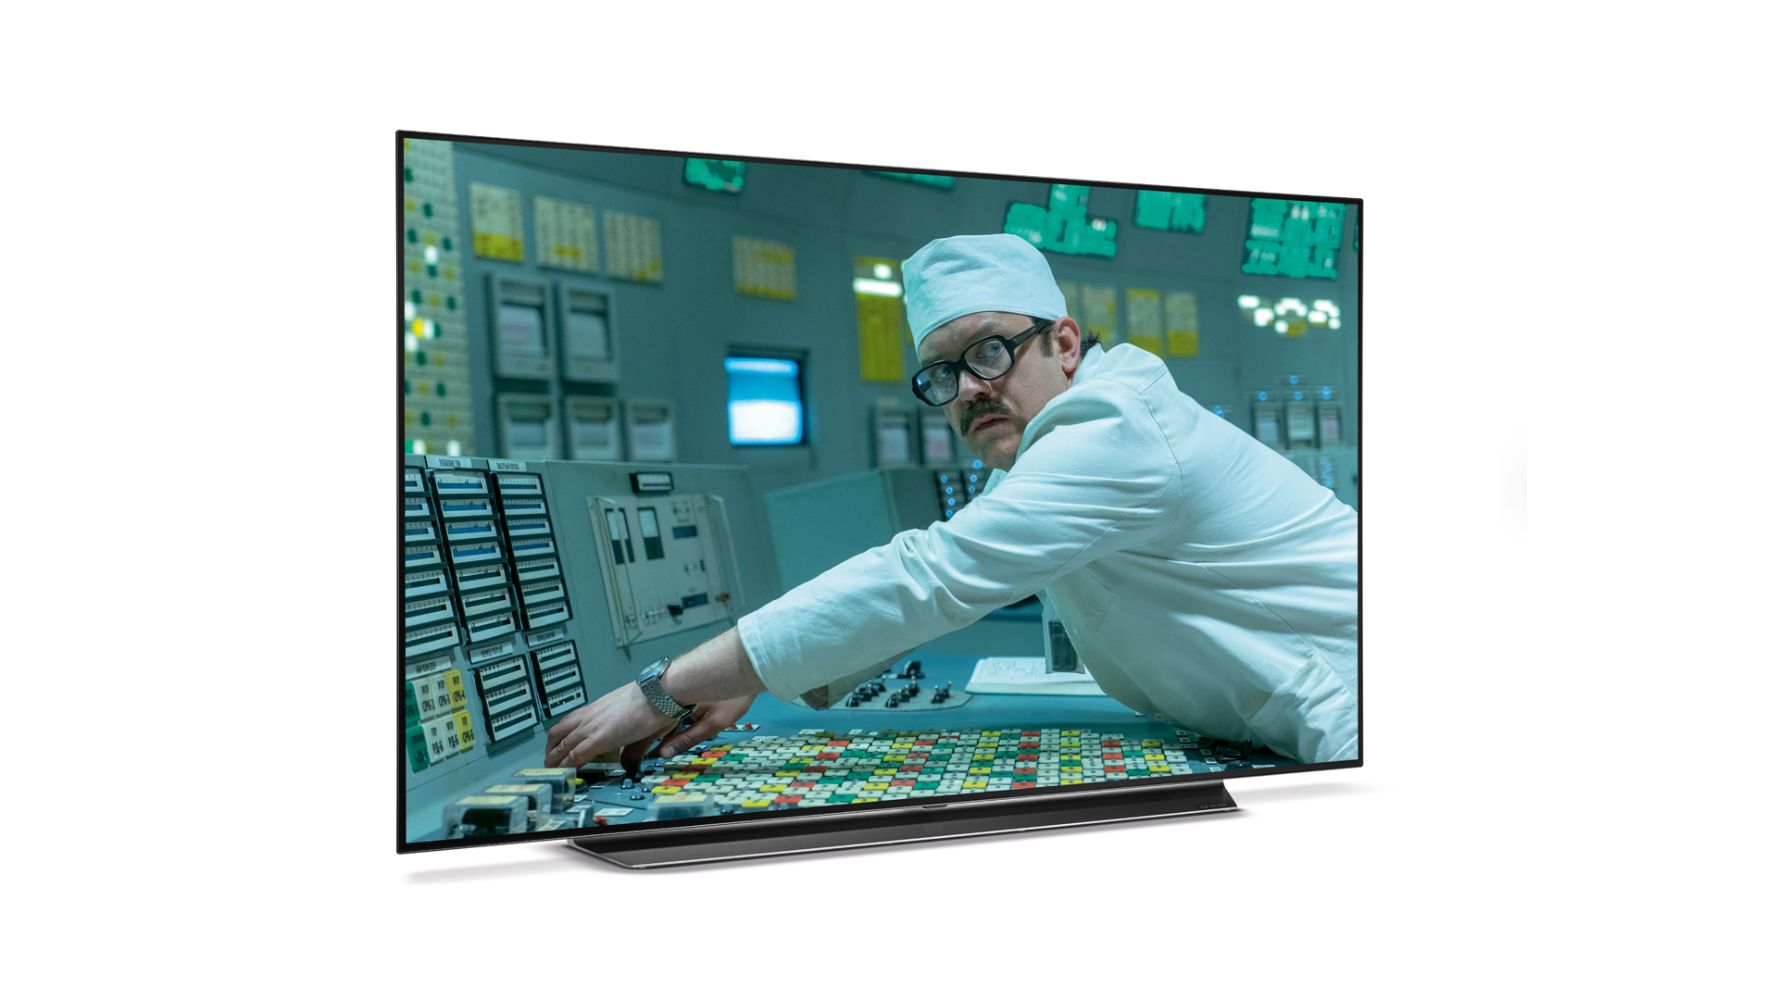 LG TVs & Monitors - Including 4k Ultra HD TVs in a Range of Sizes up to 65 Inches, Monitors up to 34 Inches. **New Lines Added**